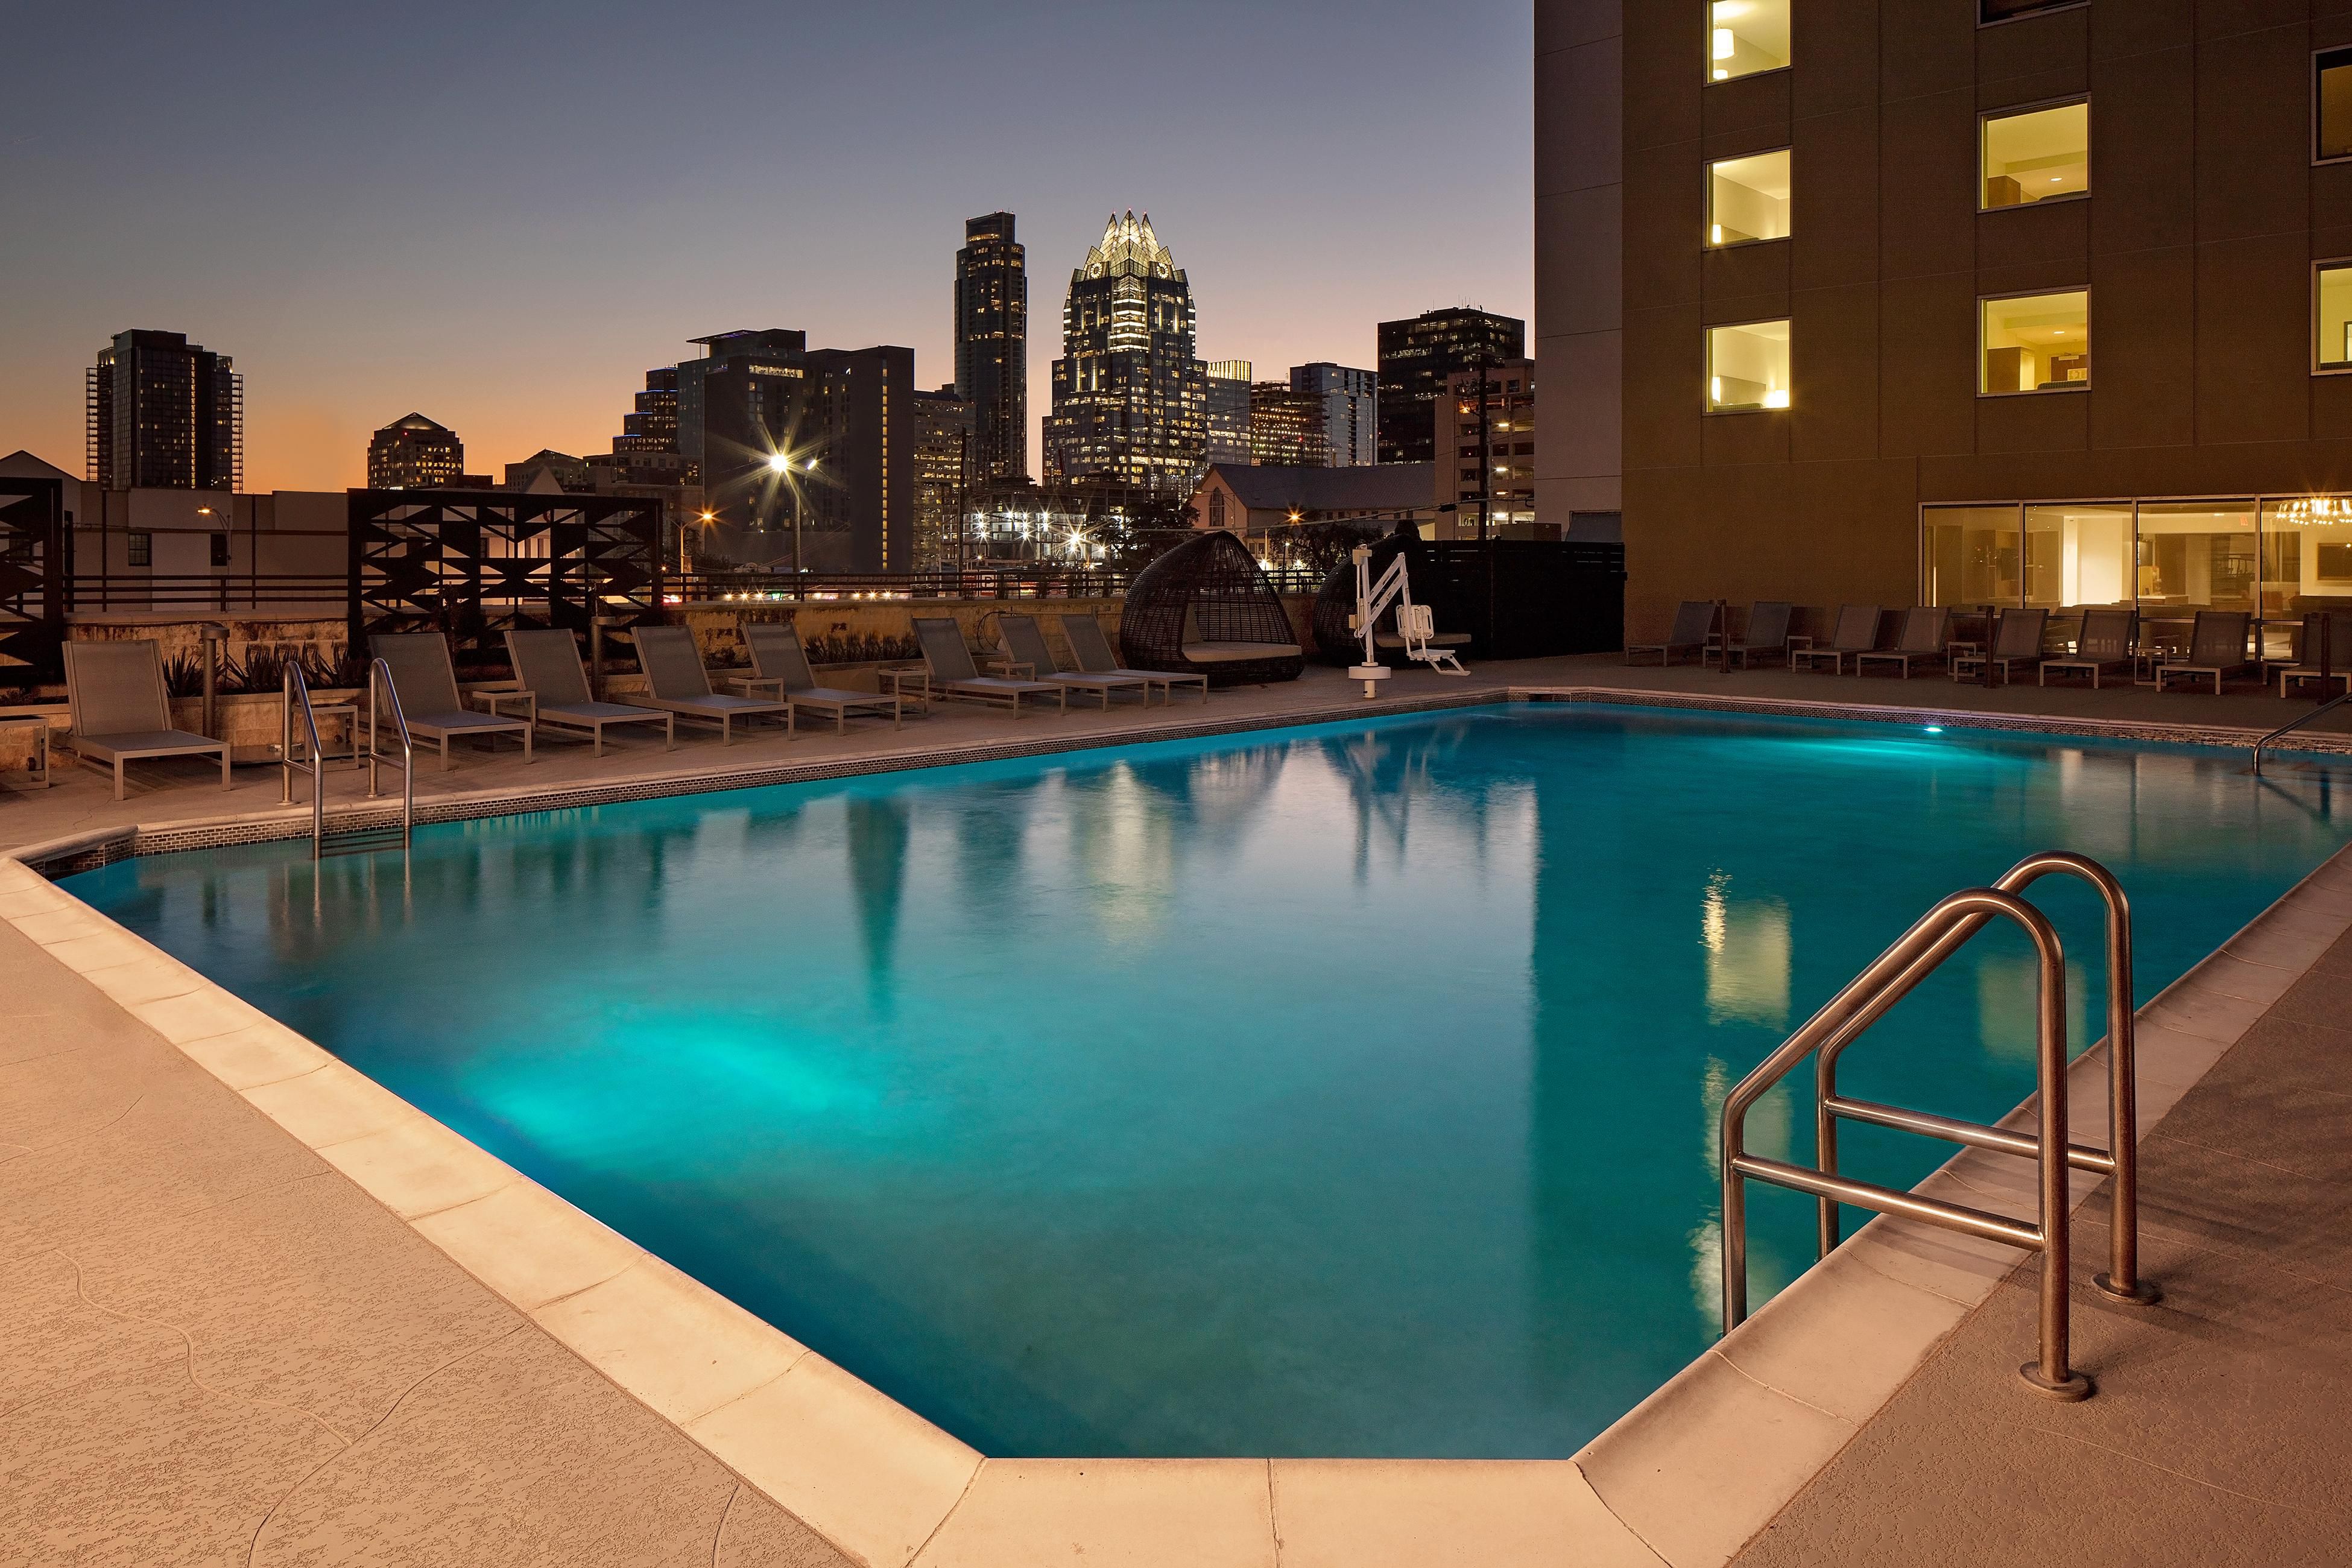 You are going to love our heated outdoor swimming pool! Take in beautiful views of Downtown Austin as you relax by our balcony pool. Open all year and every day from 6:00 AM to 10:00 PM.